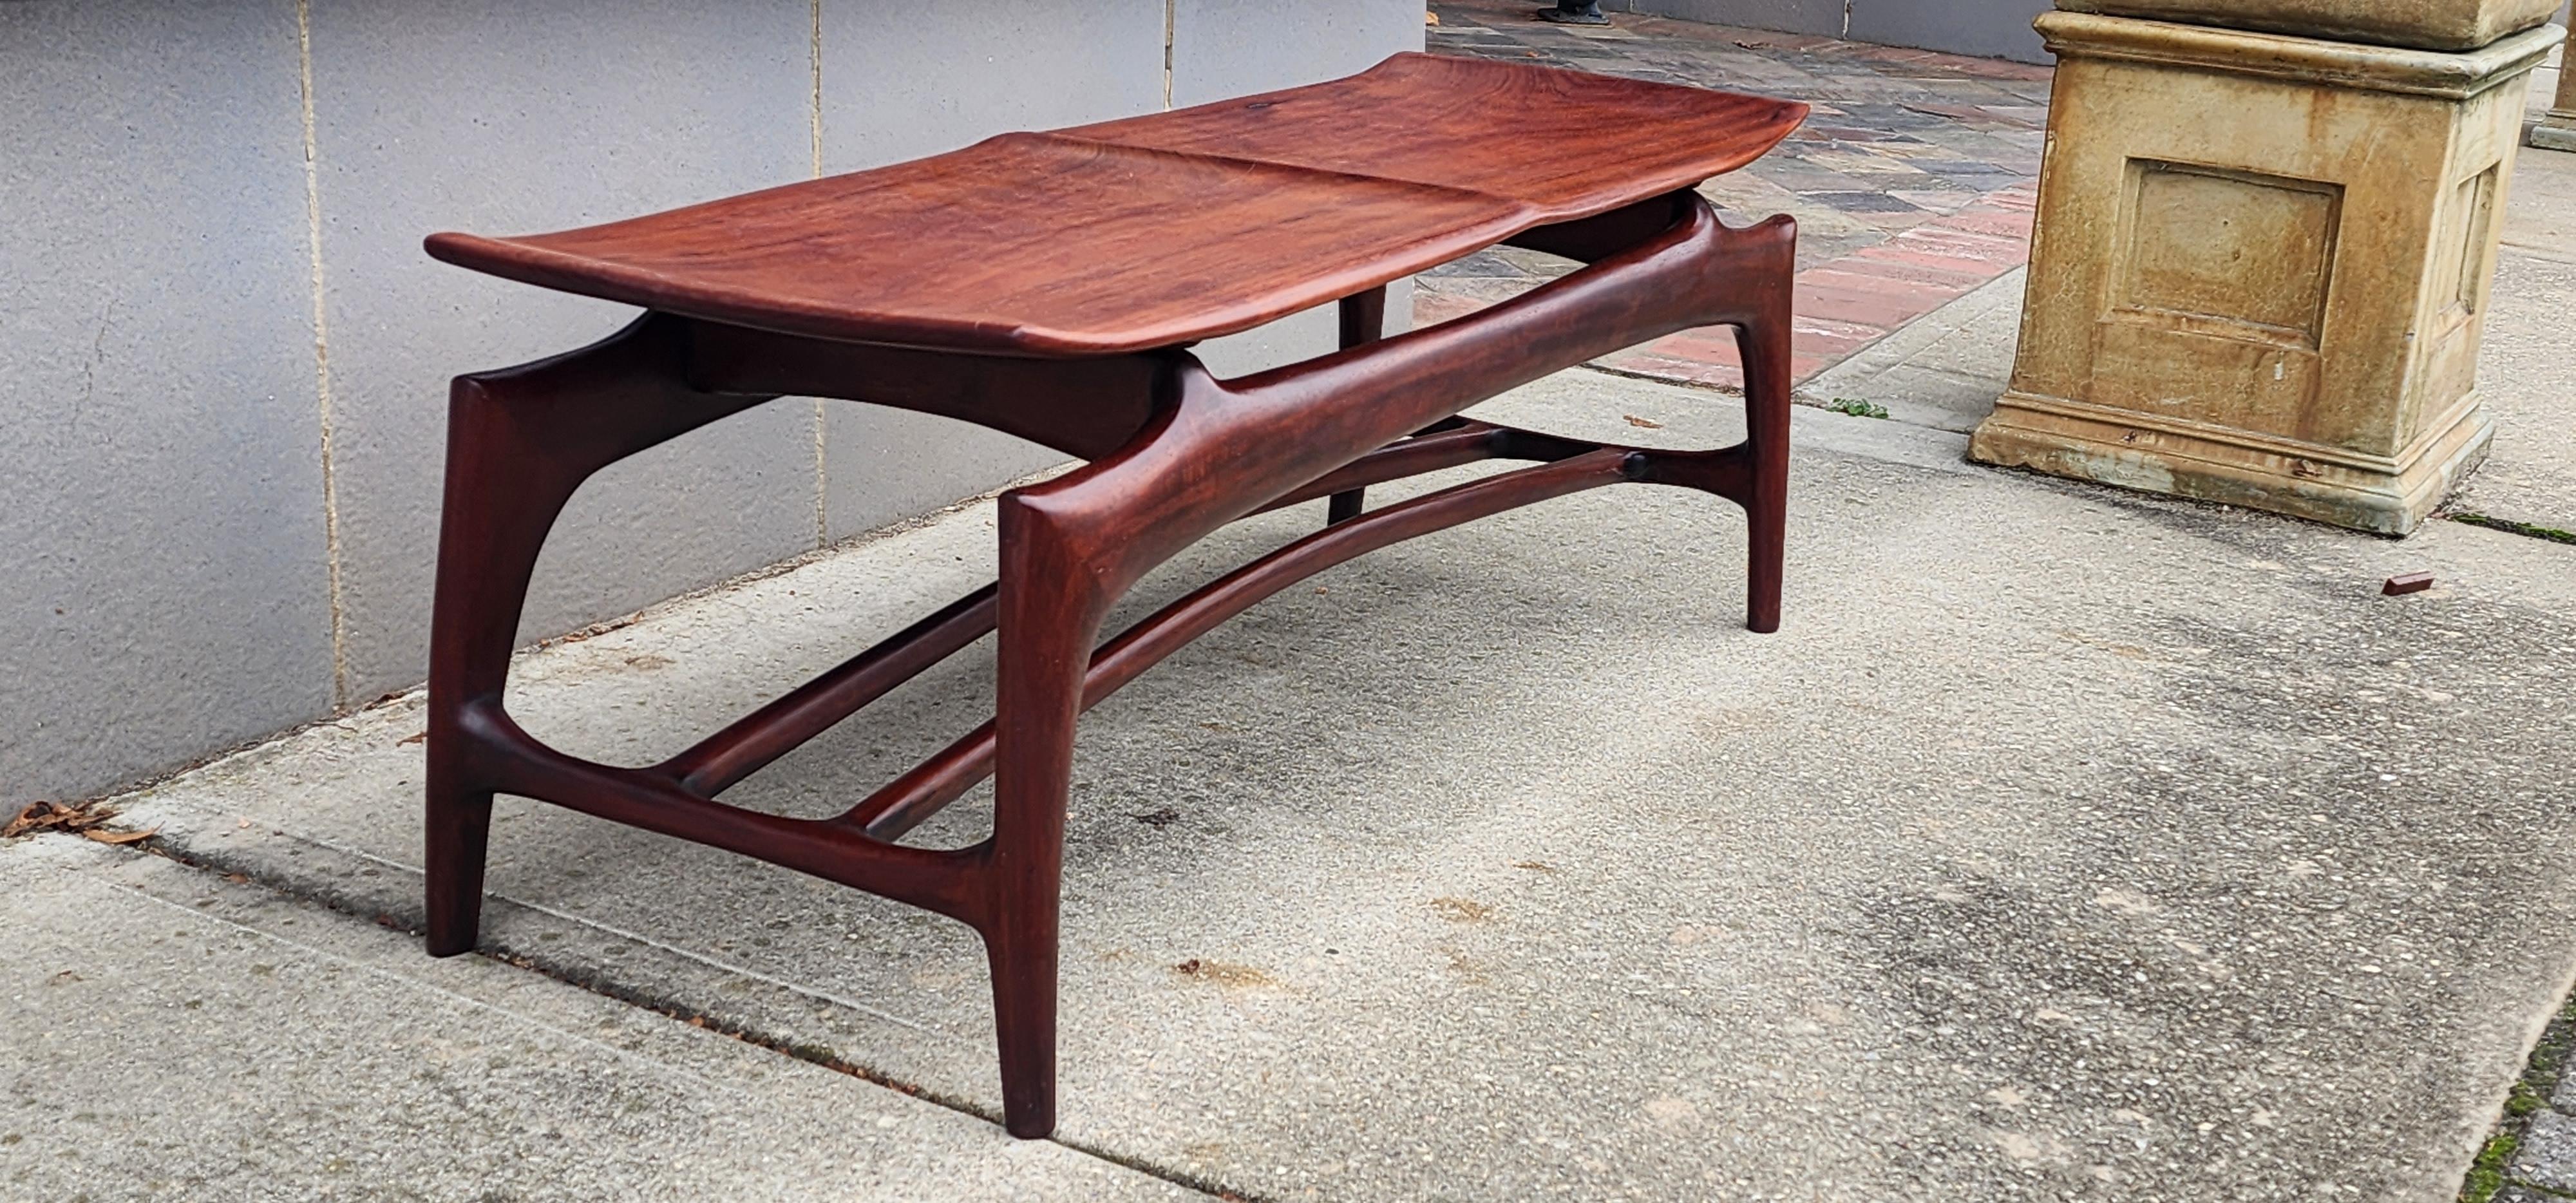 Carved Vintage Rosewood Sculptural Studio Made Coffee Table or Bench For Sale